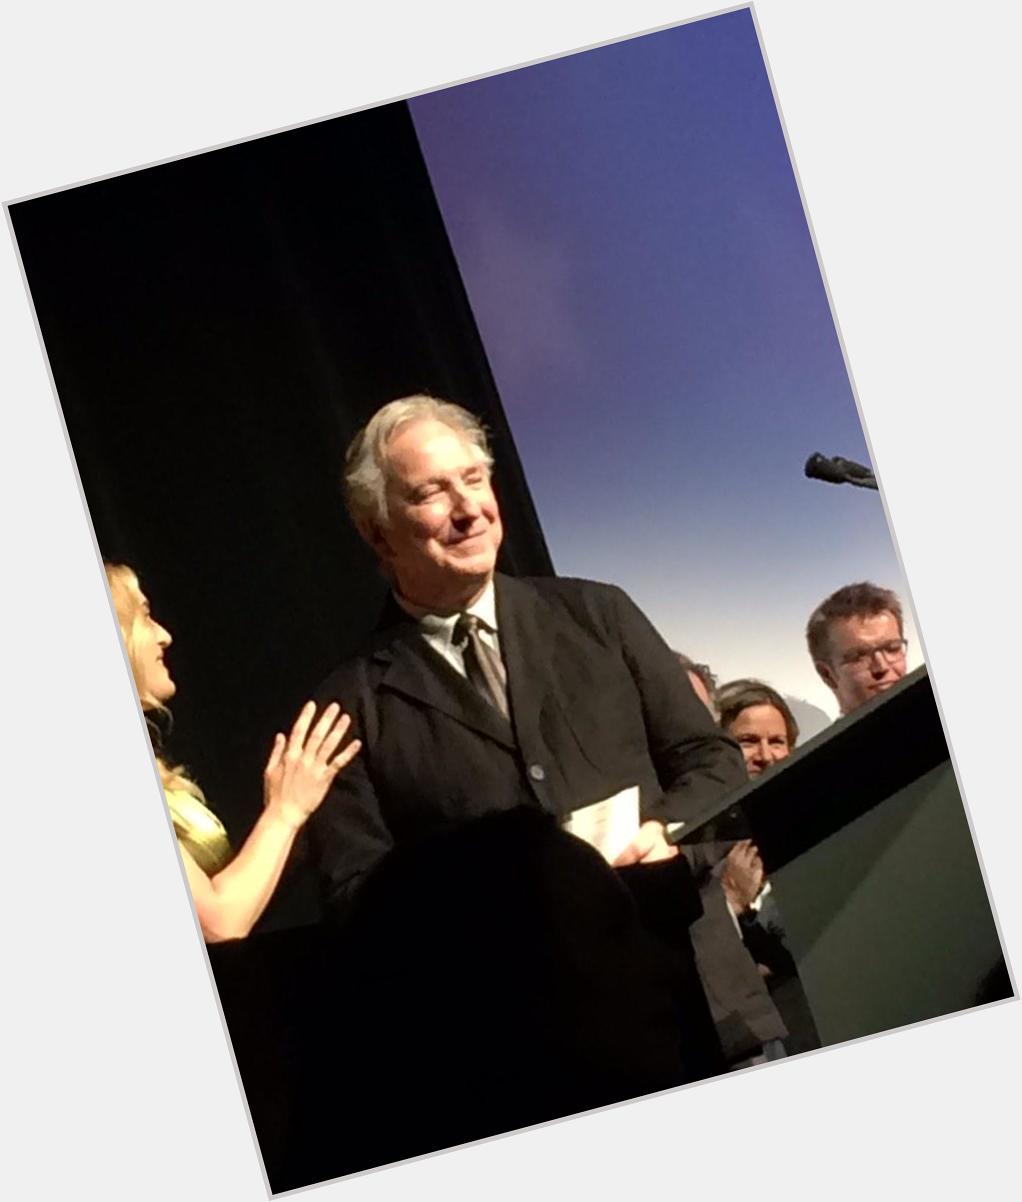 Happy birthday Alan Rickman - bet there are lots of birthday wishes at Glasgow film fest today! (My pic from TIFF) 